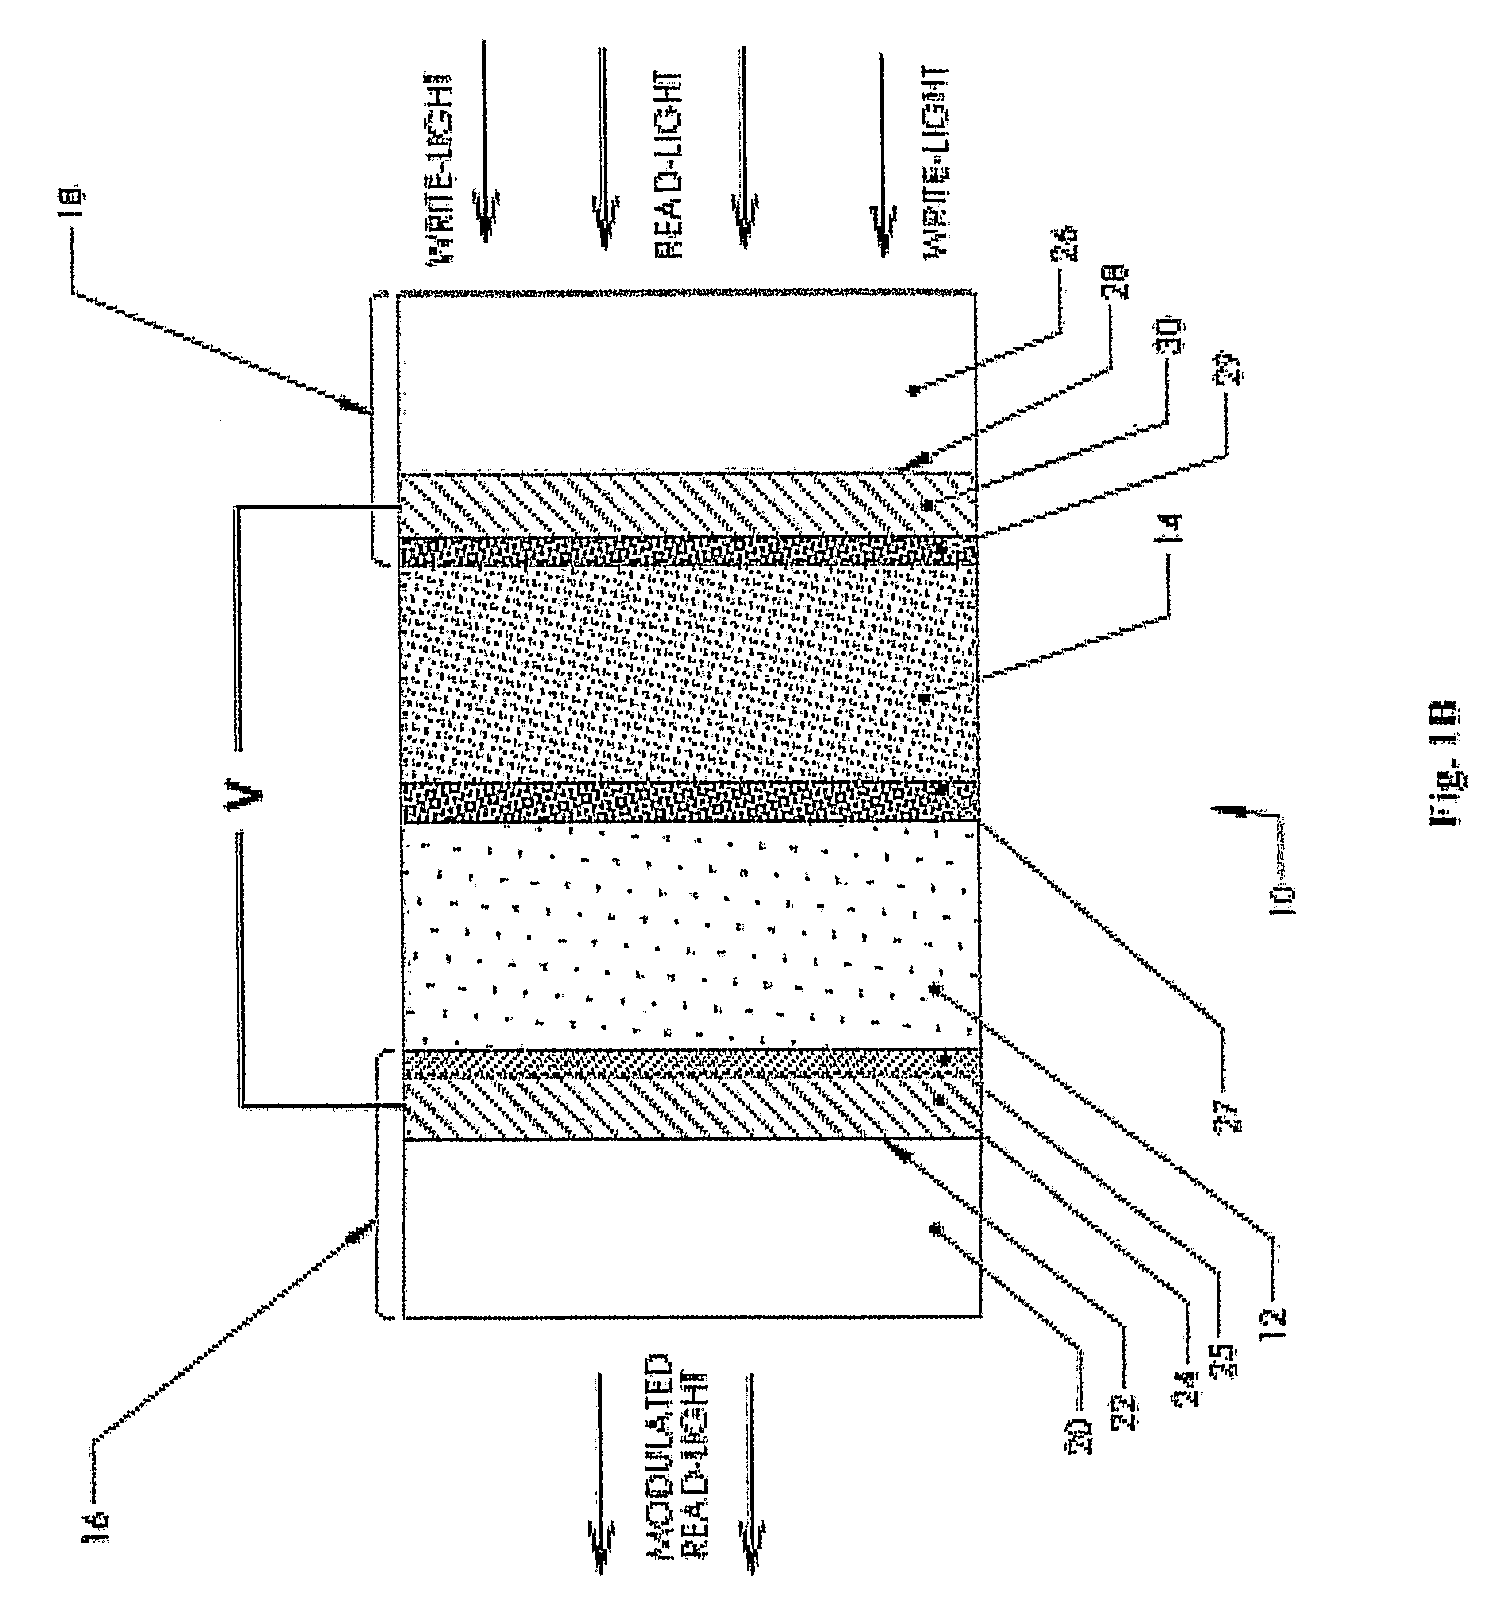 Transmissive, Optically Addressed, Photosensitive Spatial Light Modulators and Color Display Systems Incorporating Same